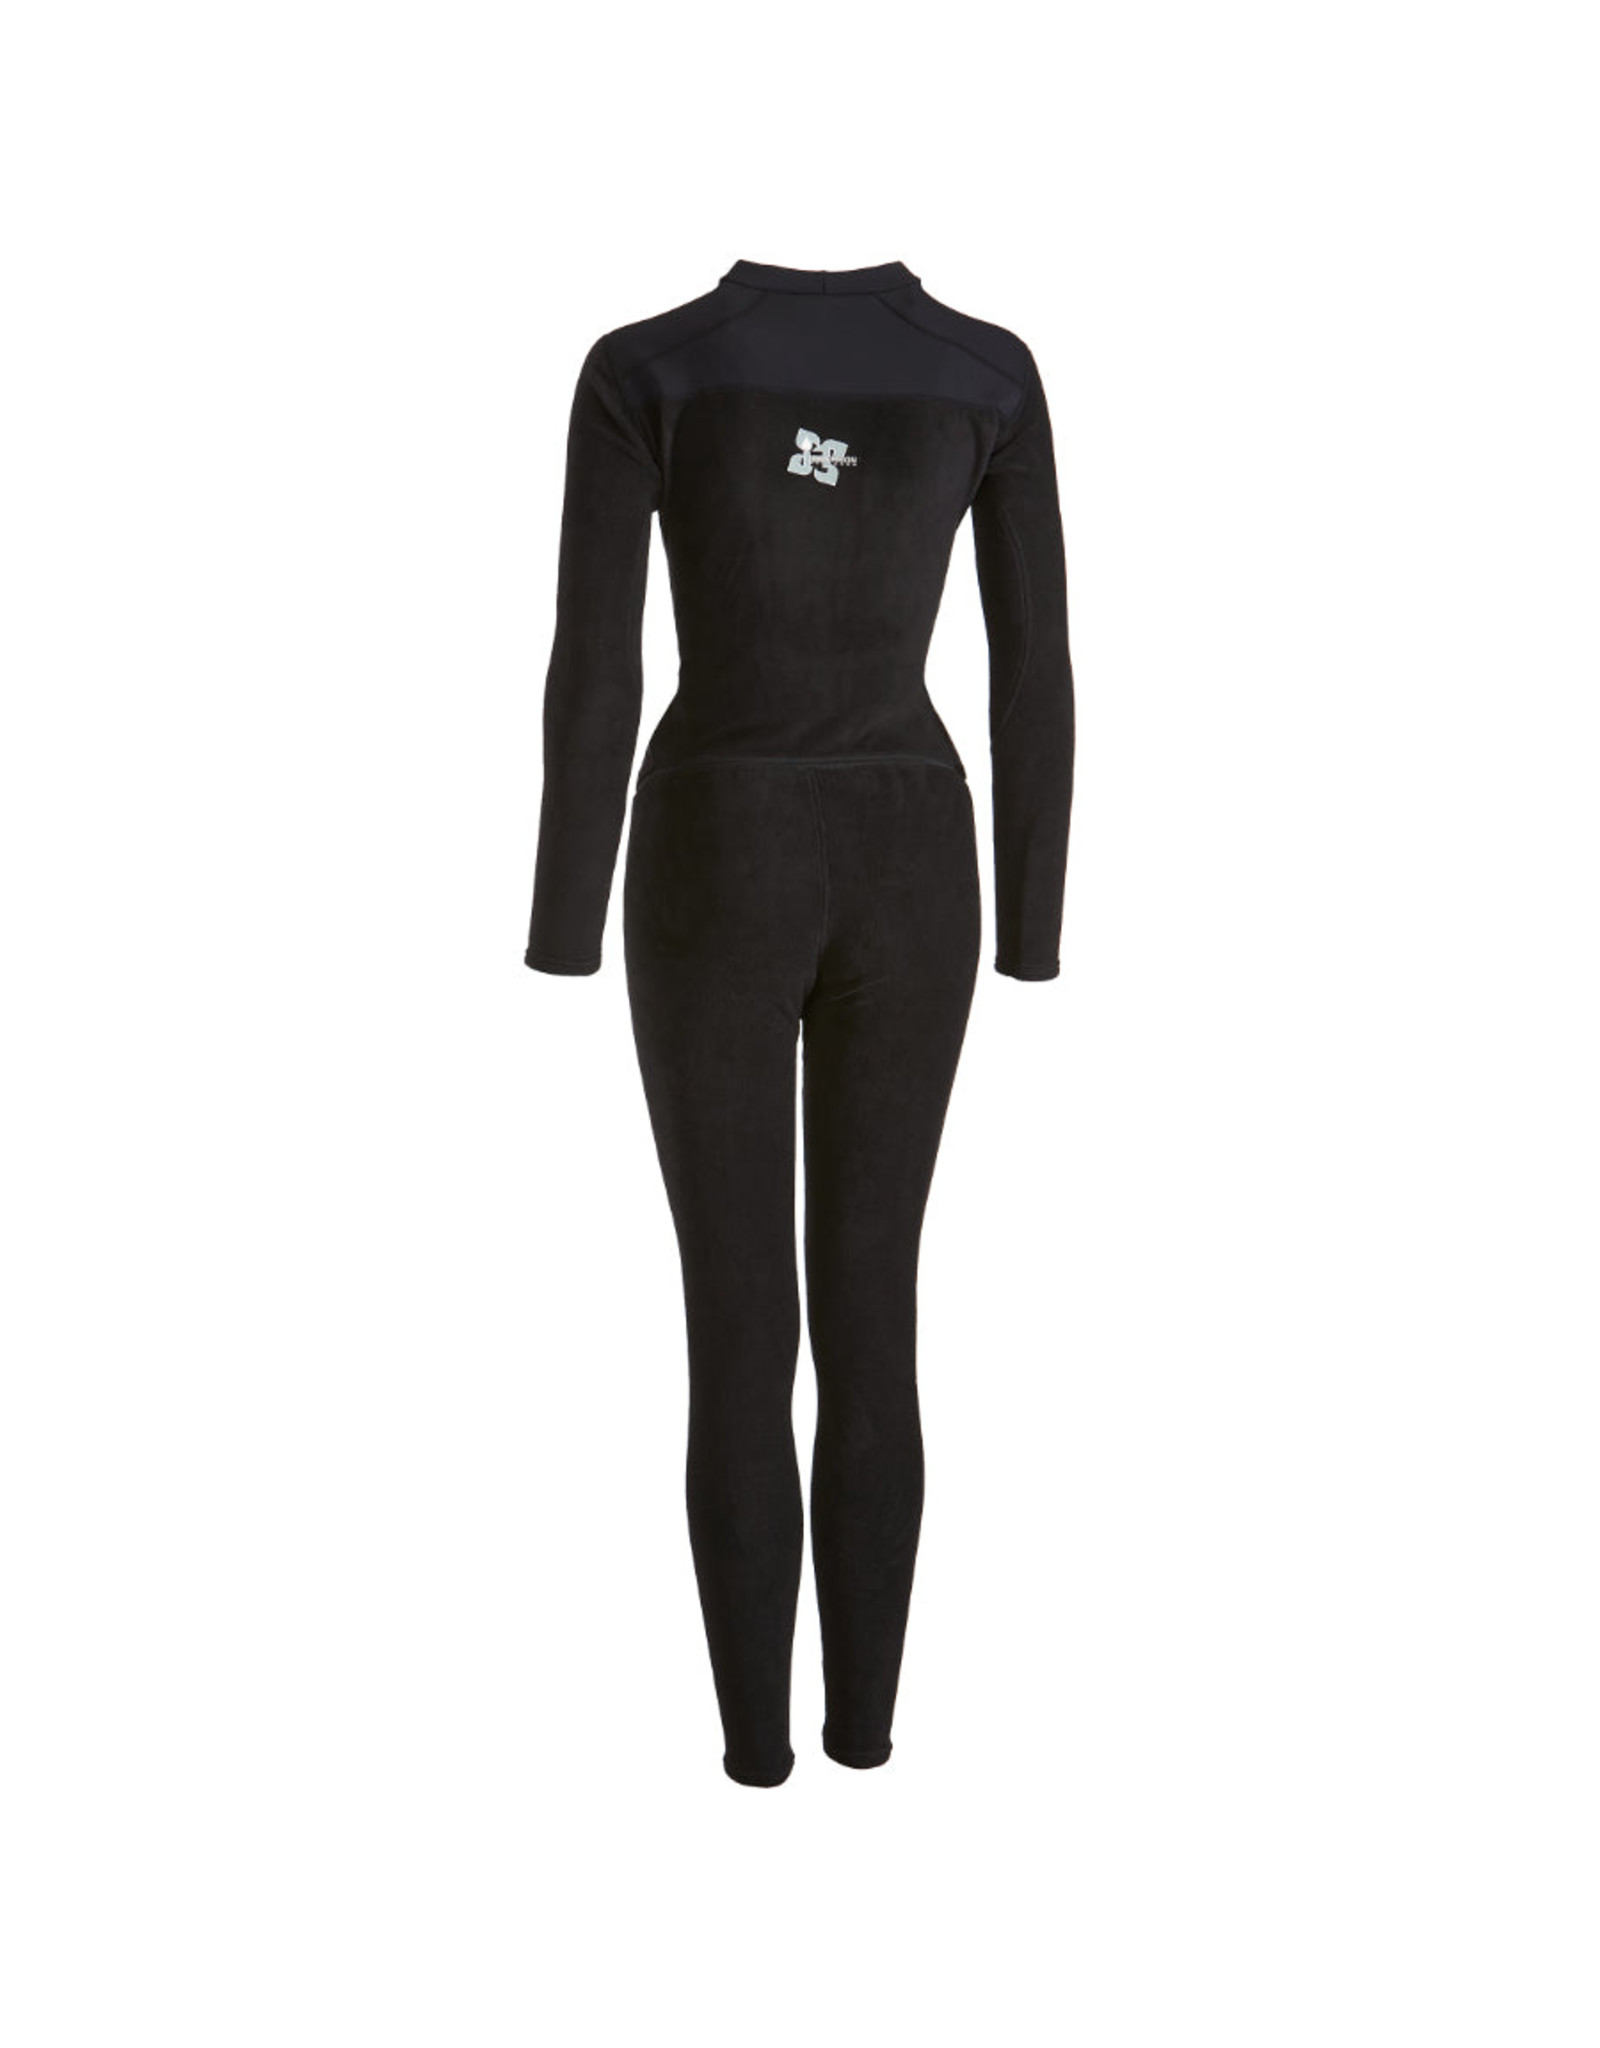 Immersion Research IR Thick Skin Union Suit - Black - Womens